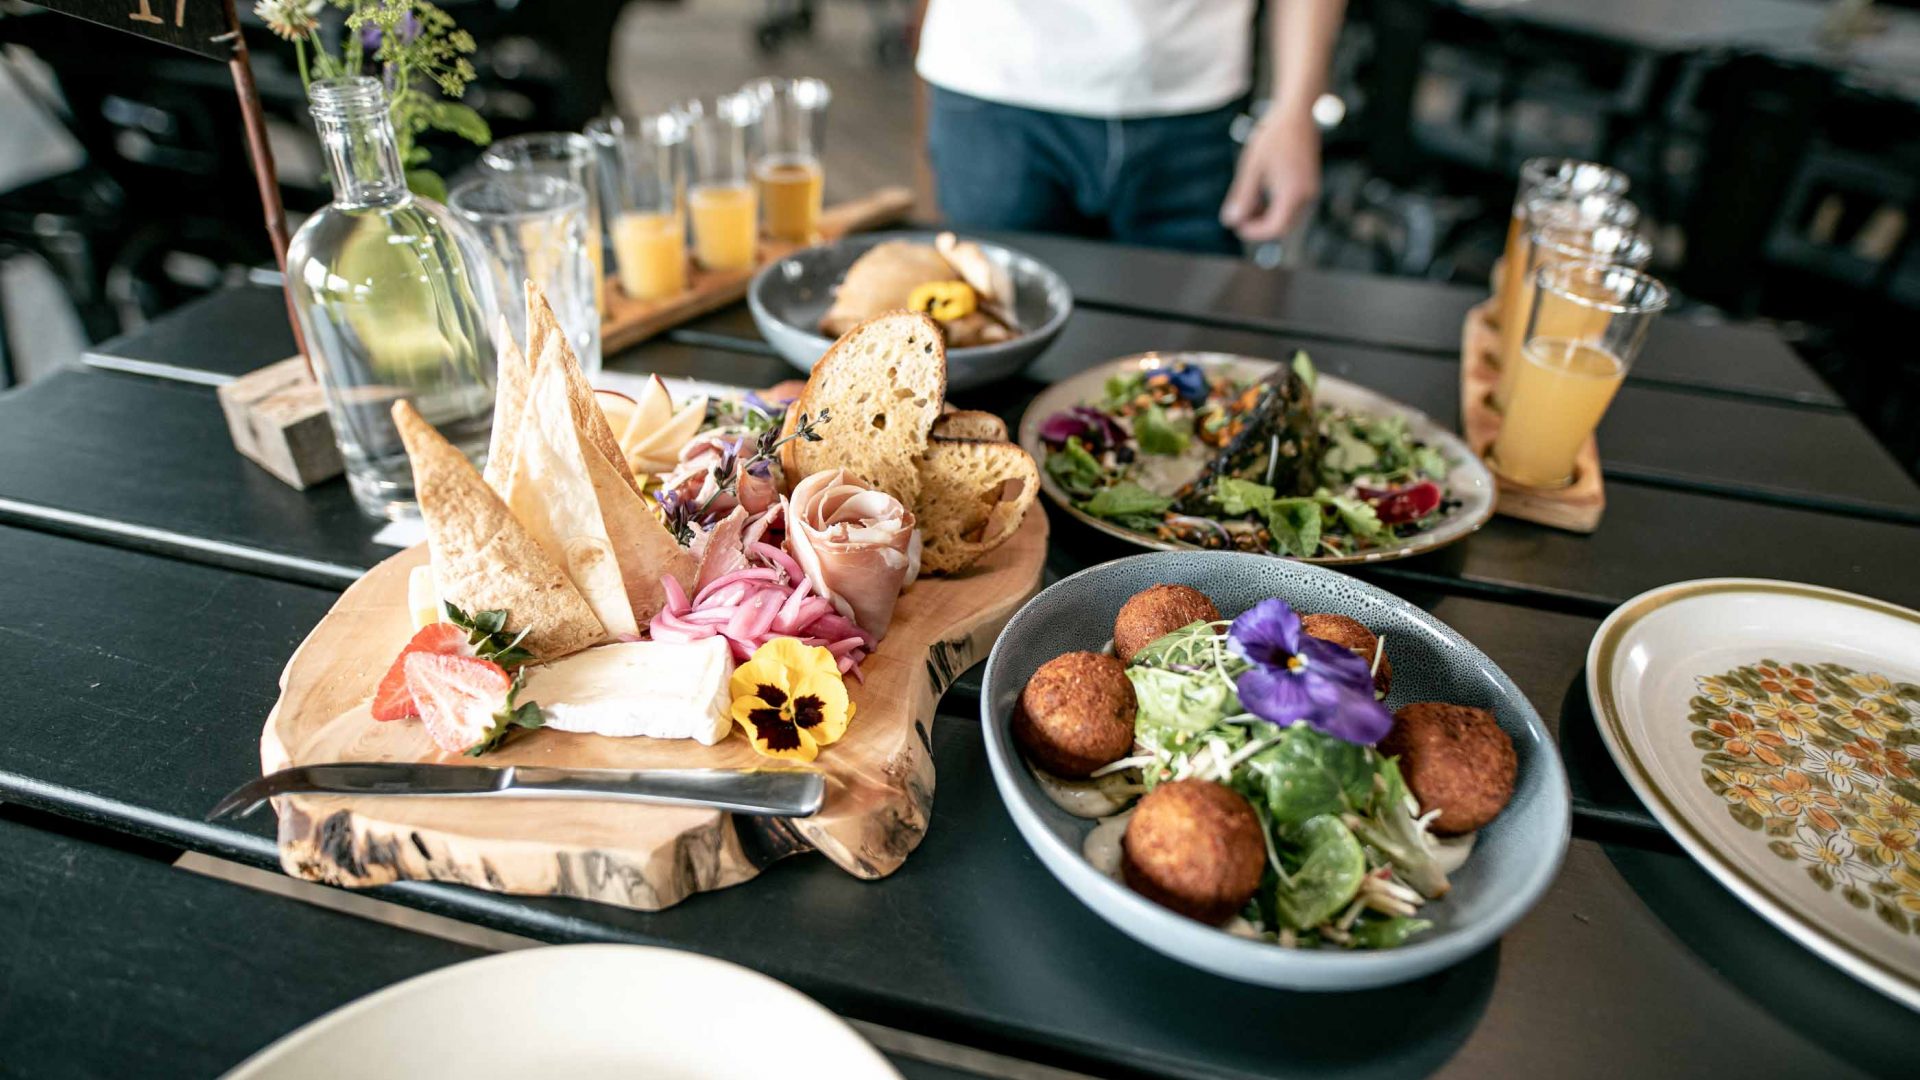 A feast of fresh food and drinks on a wooden table.